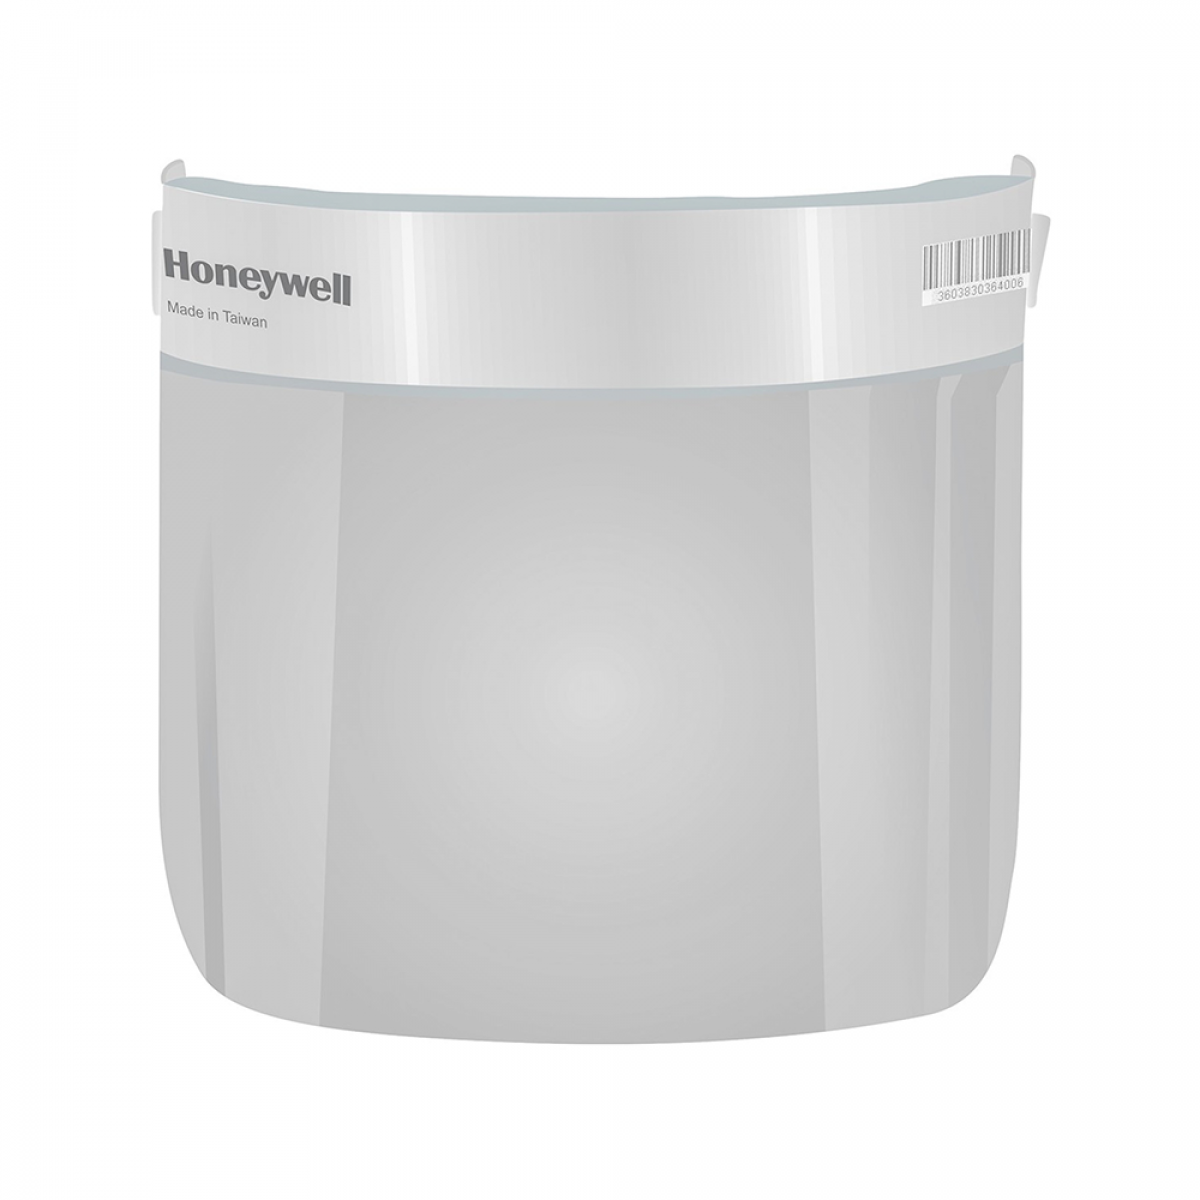 Honeywell PPE - Disposable Face Shield [1036400]